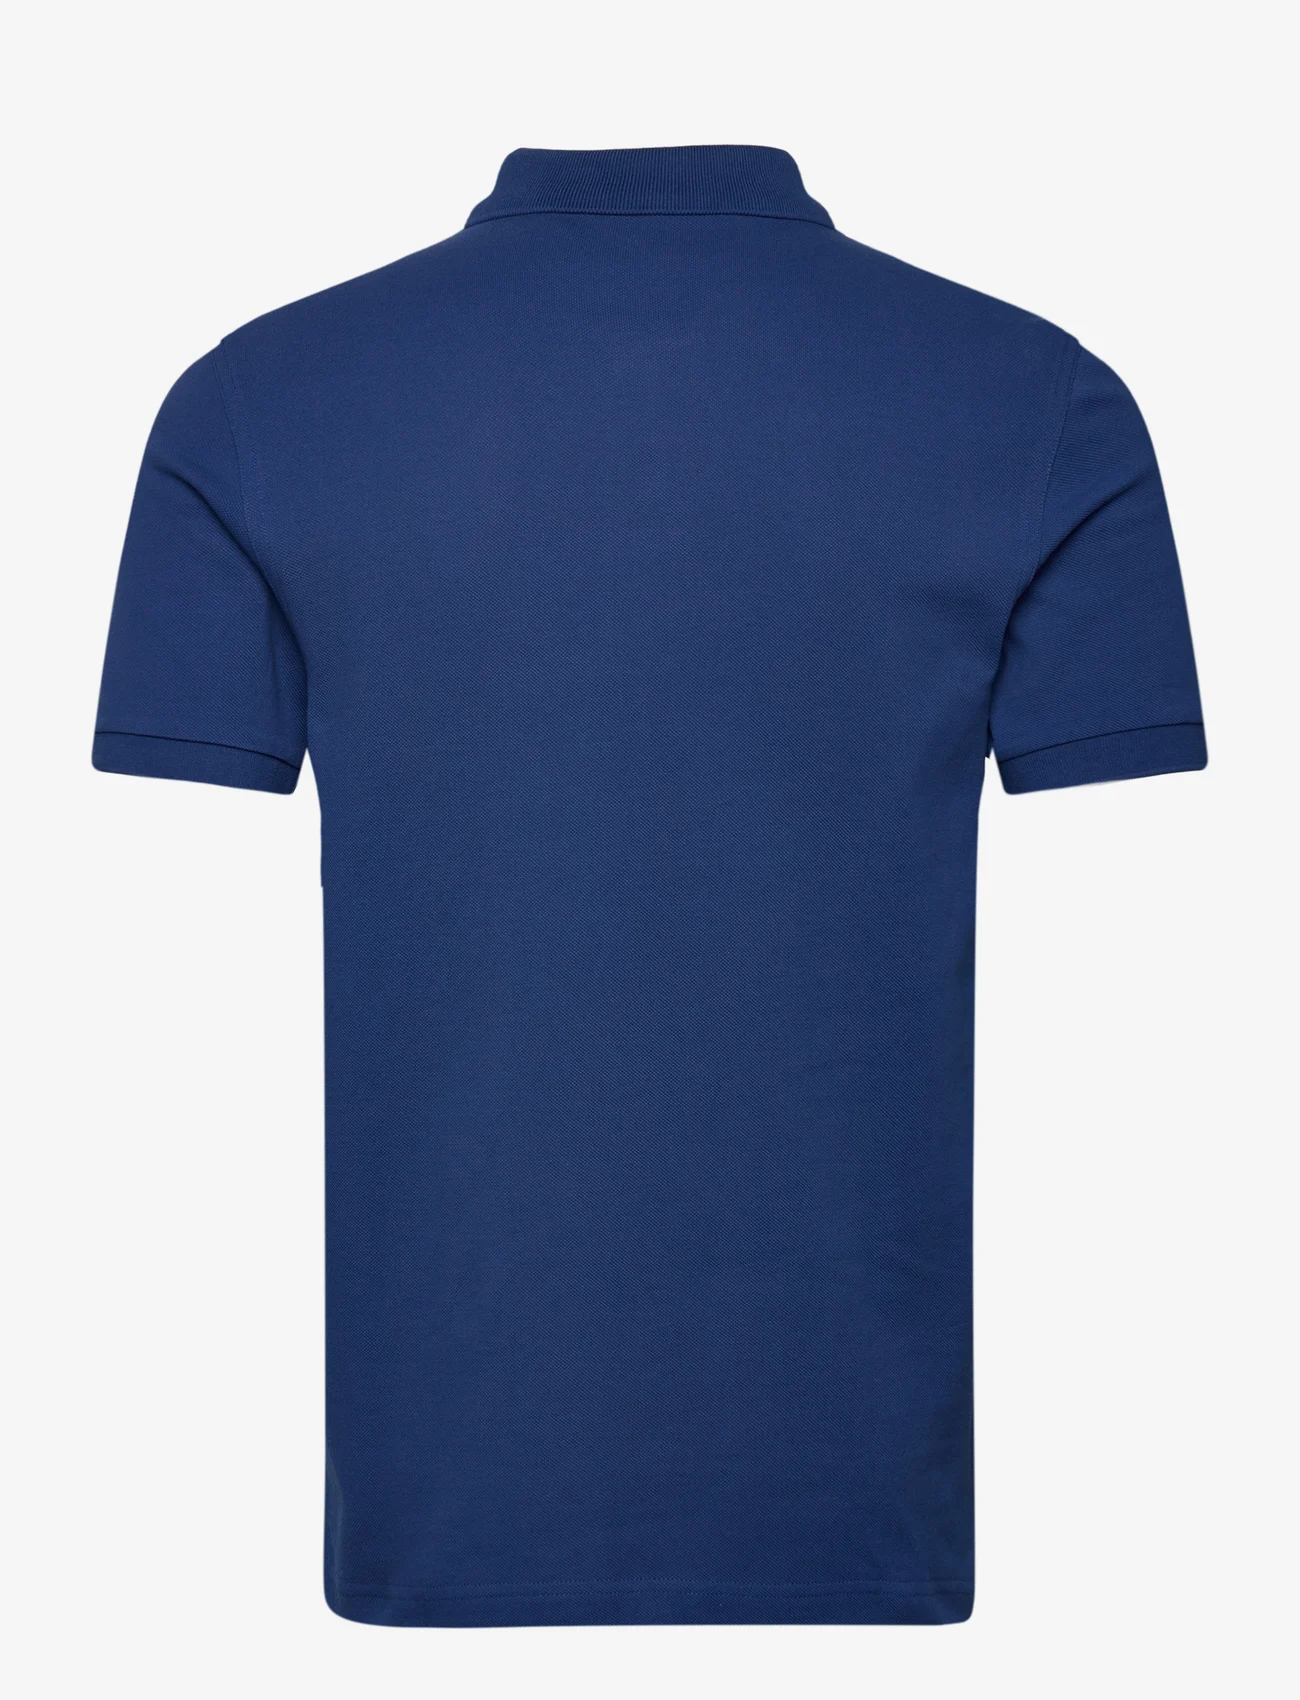 Fred Perry - THE FRED PERRY SHIRT - kortermede - shadedcobalt/nvy - 1